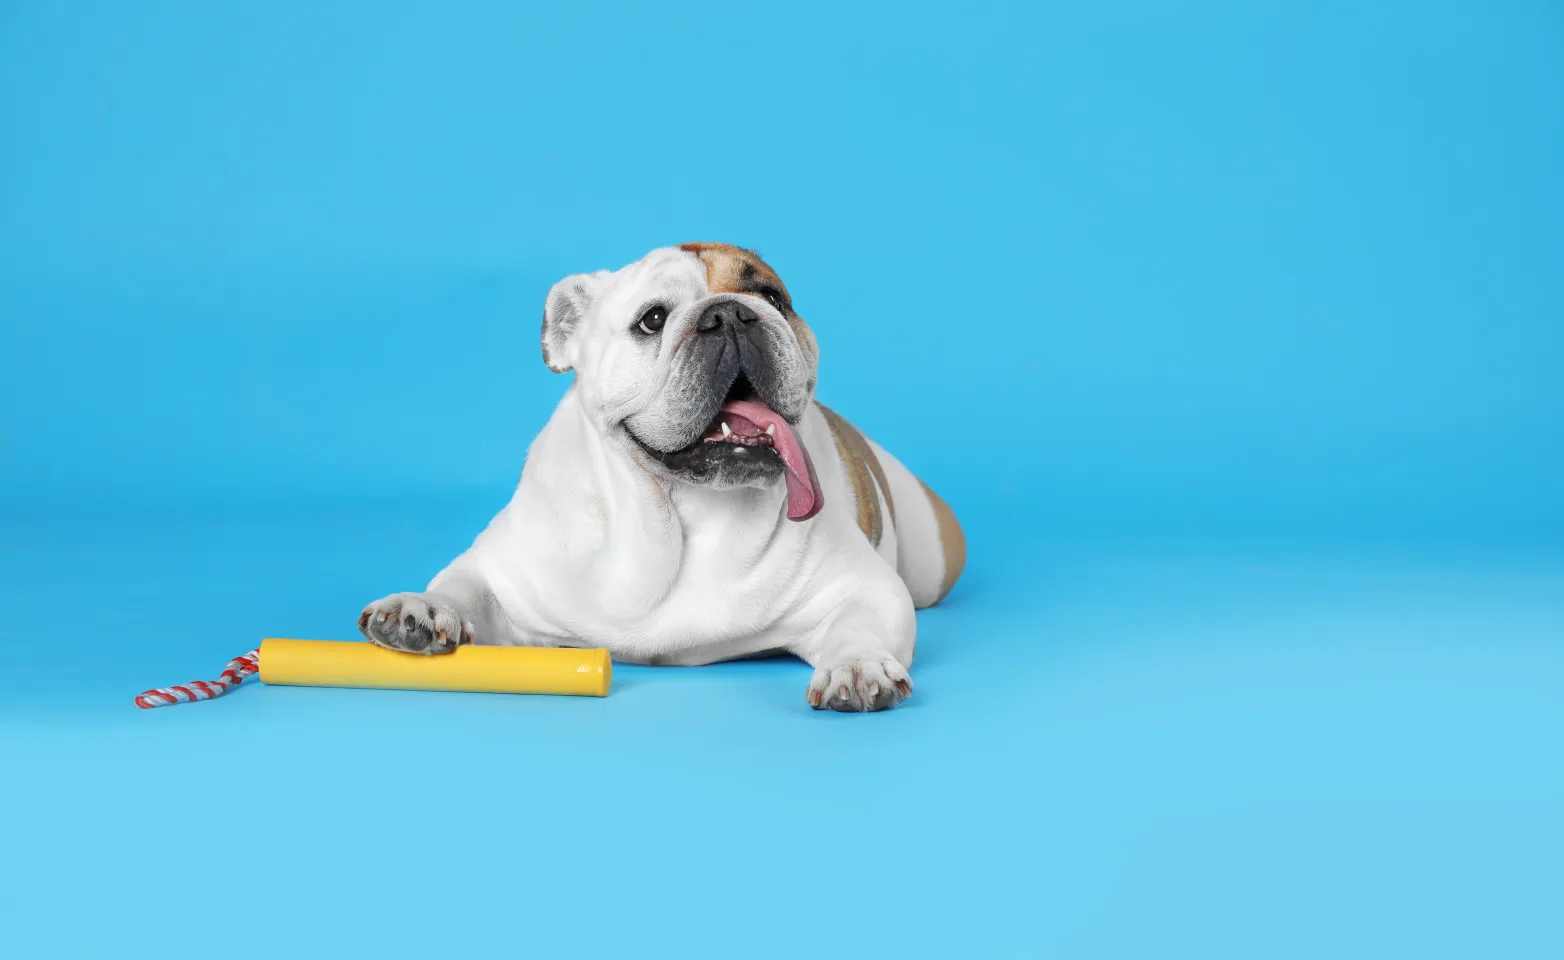 Dog with day laying dow in front of blue background